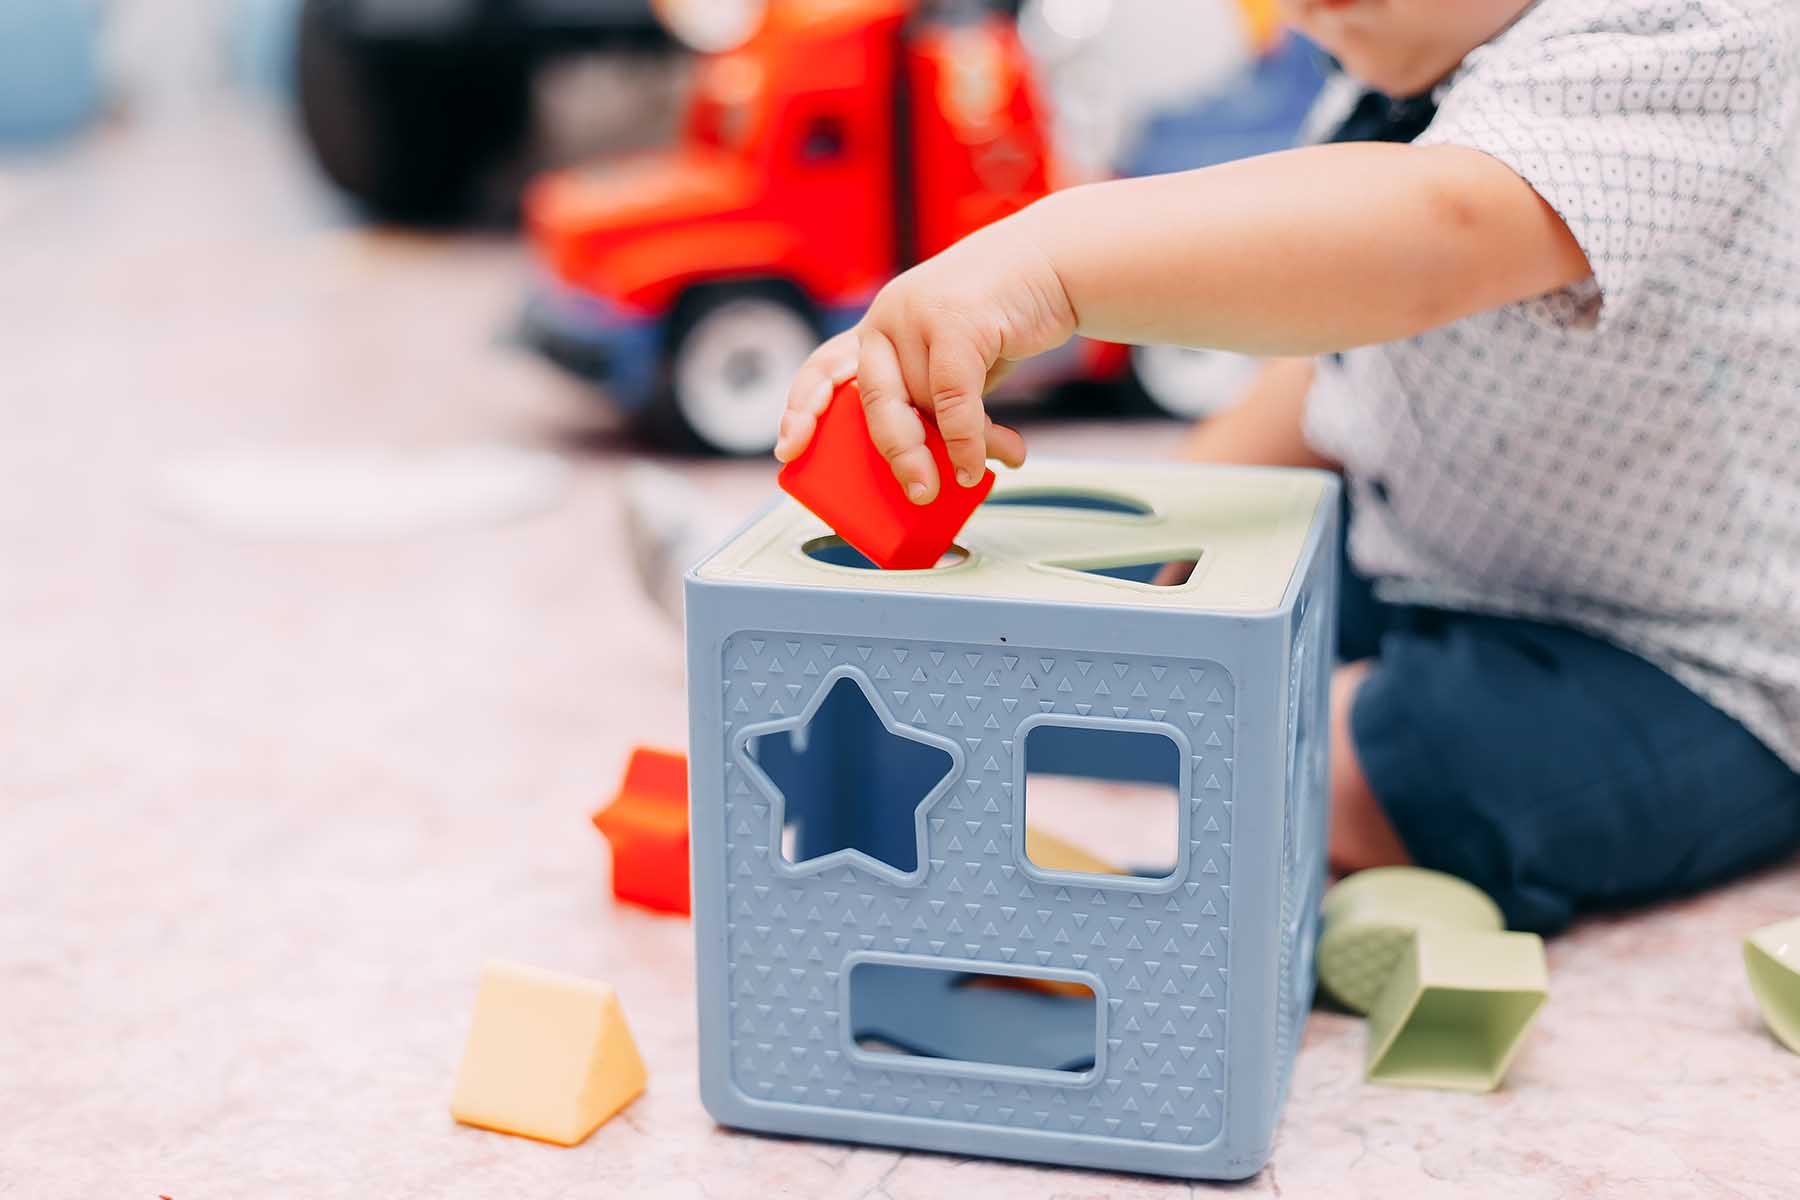 A young toddler plays with blocks and a box on the floor